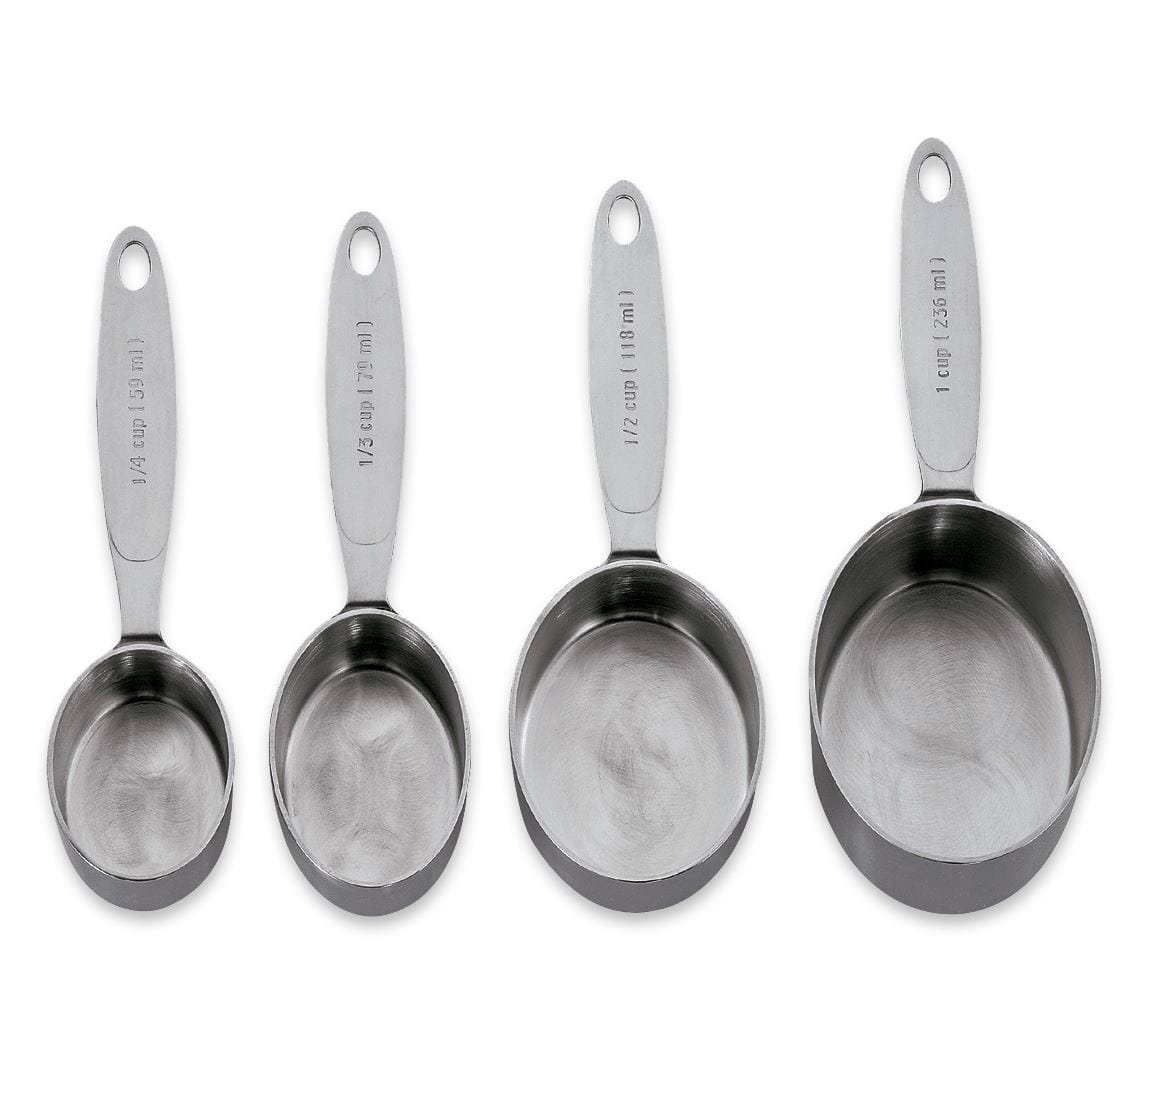  Le Creuset Stainless Steel Measuring Cups, Set of 4: Home &  Kitchen